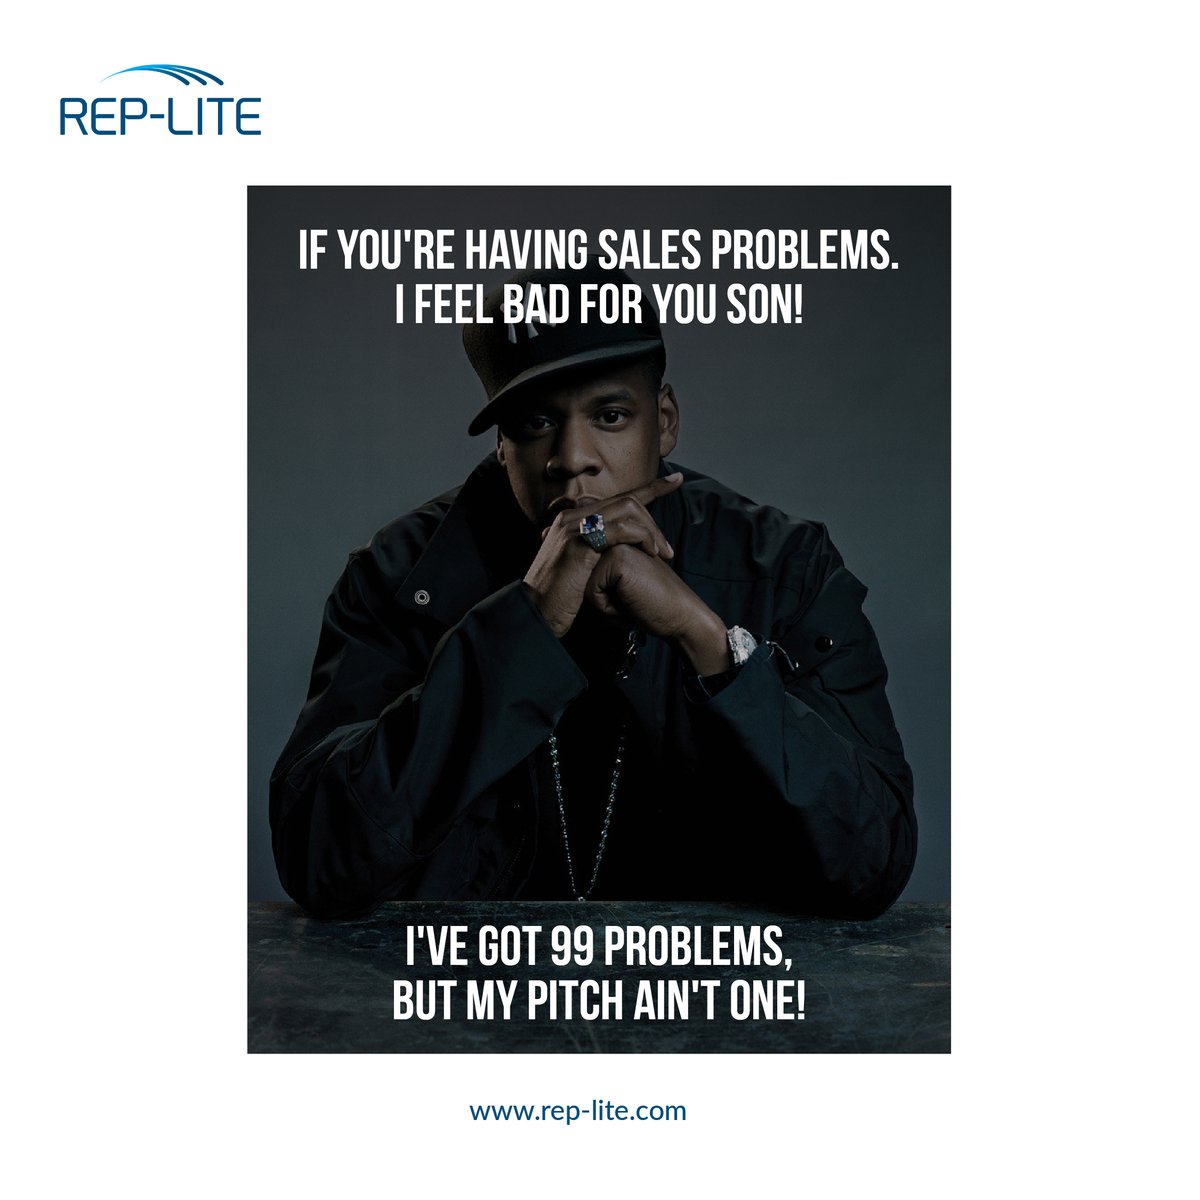 Sales problems? Our sales reps have 99 solutions, and a smooth pitch is one of 'em! 

#Replite #MedicalSales #SalesLife #SalesHumor #SalesInterview #MedicalSalesHumor #SalesSolutions #SmoothPitch #99Problems